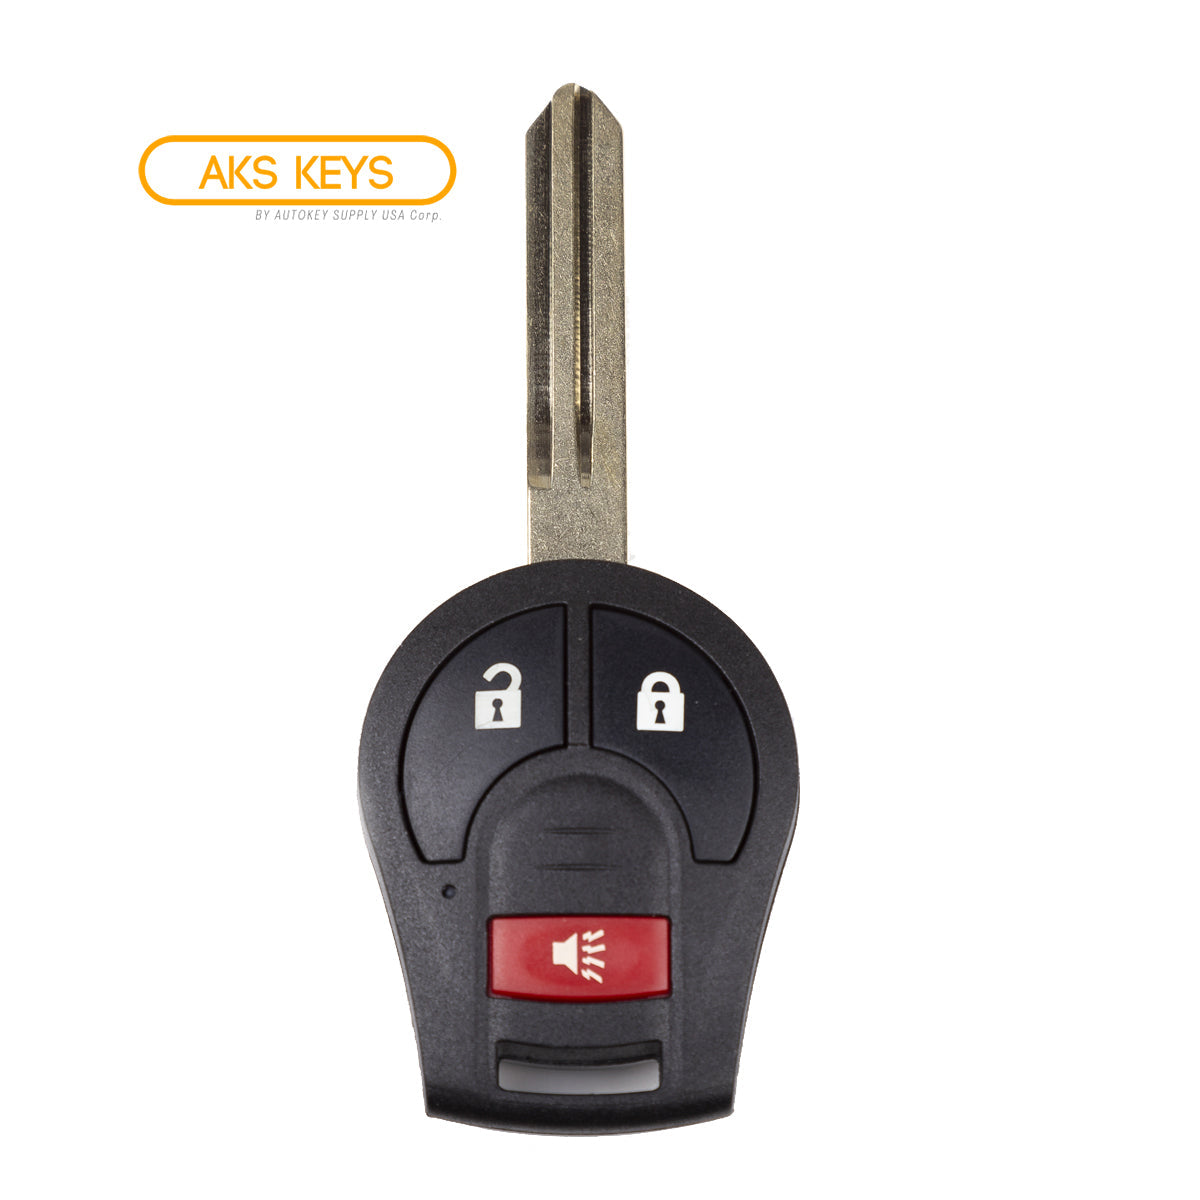 2006 Nissan Quest Key Fob Replacement - Aftermarket - 3 Buttons Fob FCC# CWTWB1U751